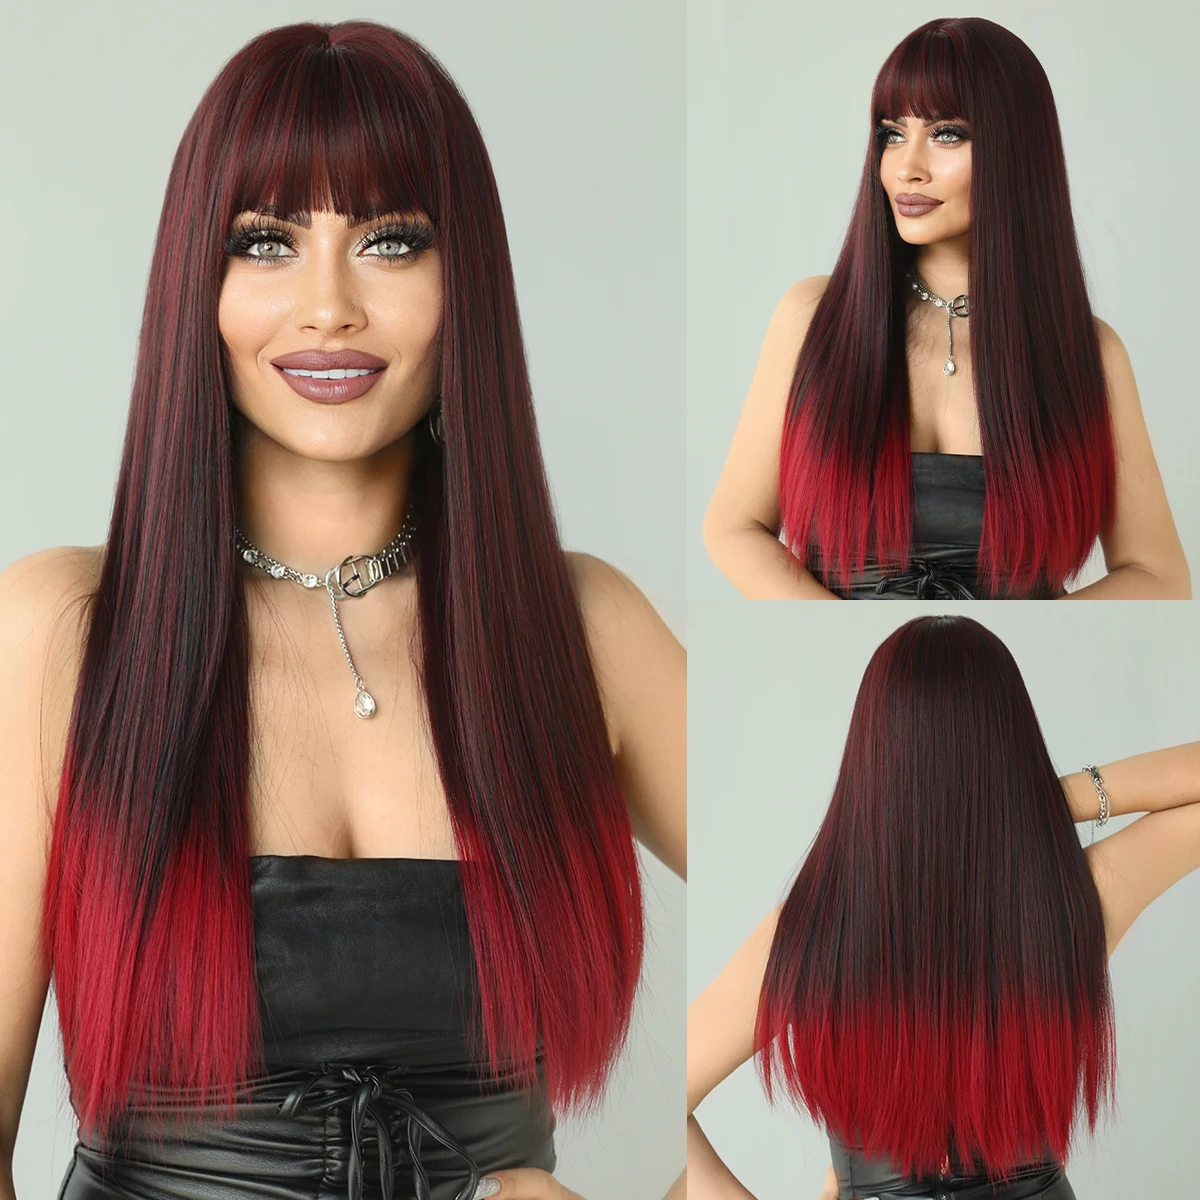 NAMM Halloween Cosplay Wig with Bang Synthetic Wigs for Women Heat Resistant Natural Hair Long Straight Ombre Wine Red Wigs